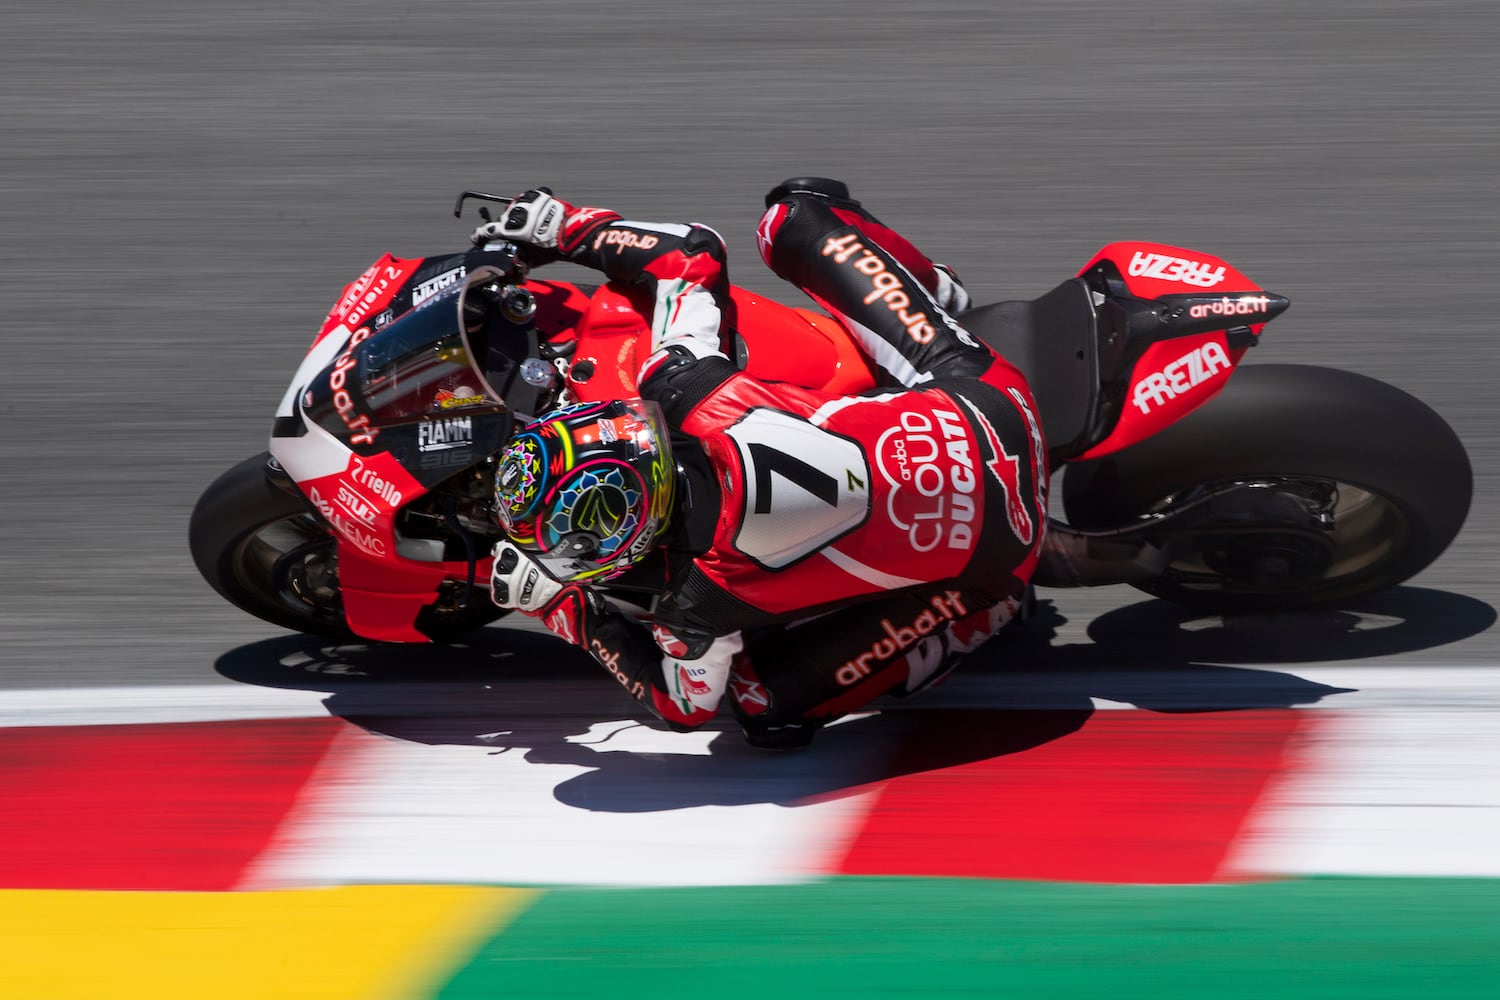 Chaz Davies winning on the Panigale 1199 V-2 at Laguna Seca. | Photo: Cycle World Archives